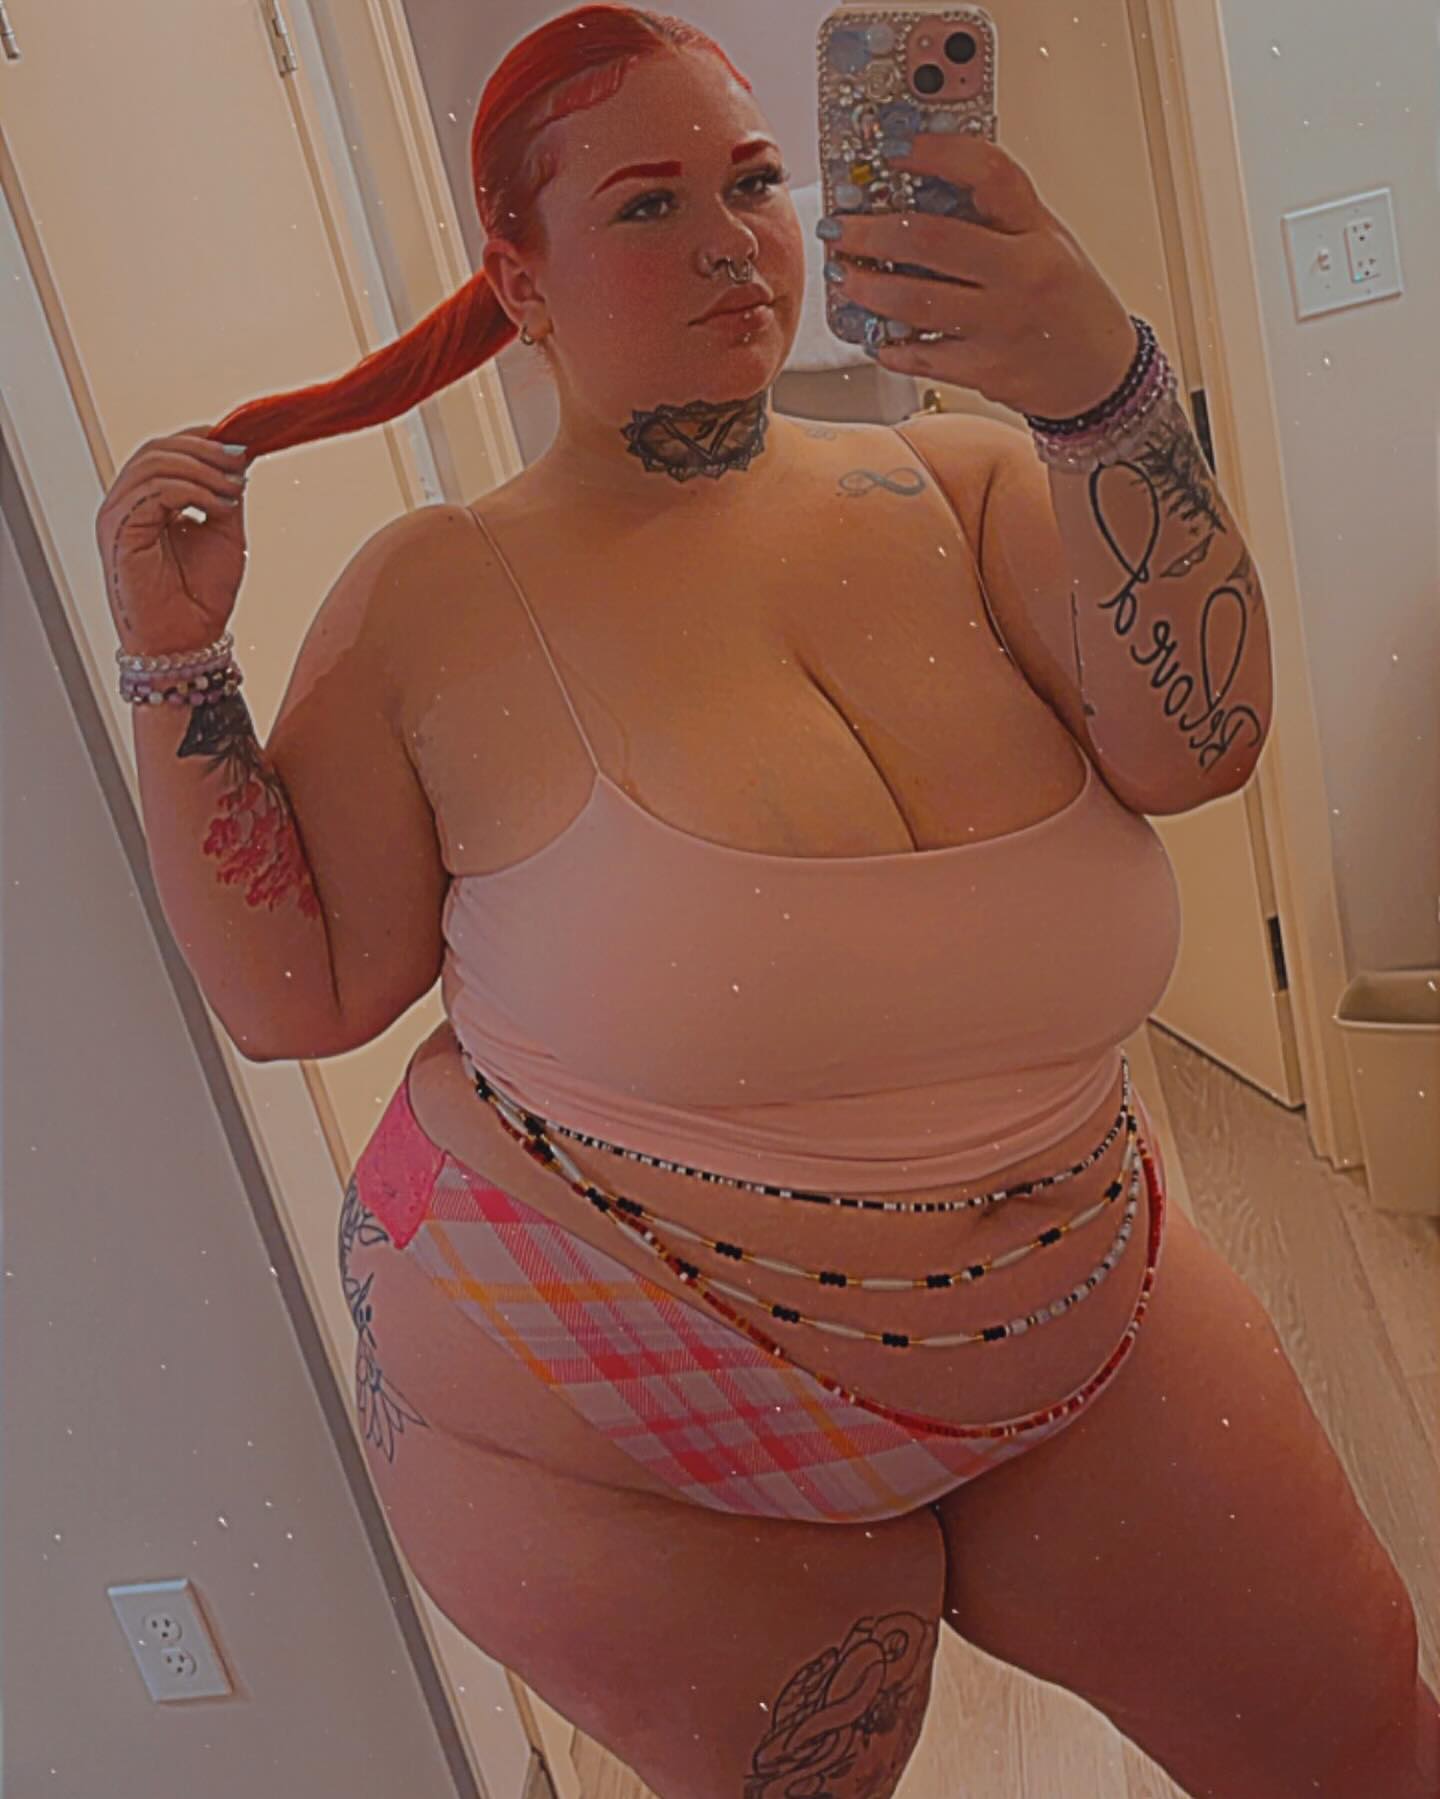 Happy Easter 🐰 💜 

Sub to my free OF to catch me live🥳

#mood #content #contentmarketing #contentcreator #contentcreators #contentideas #onlyfansgirls #onlyfangirl #onlyfansmodel #onlyfansbabe #bbw #plussize  #plussizemodel #explorepage #foryou